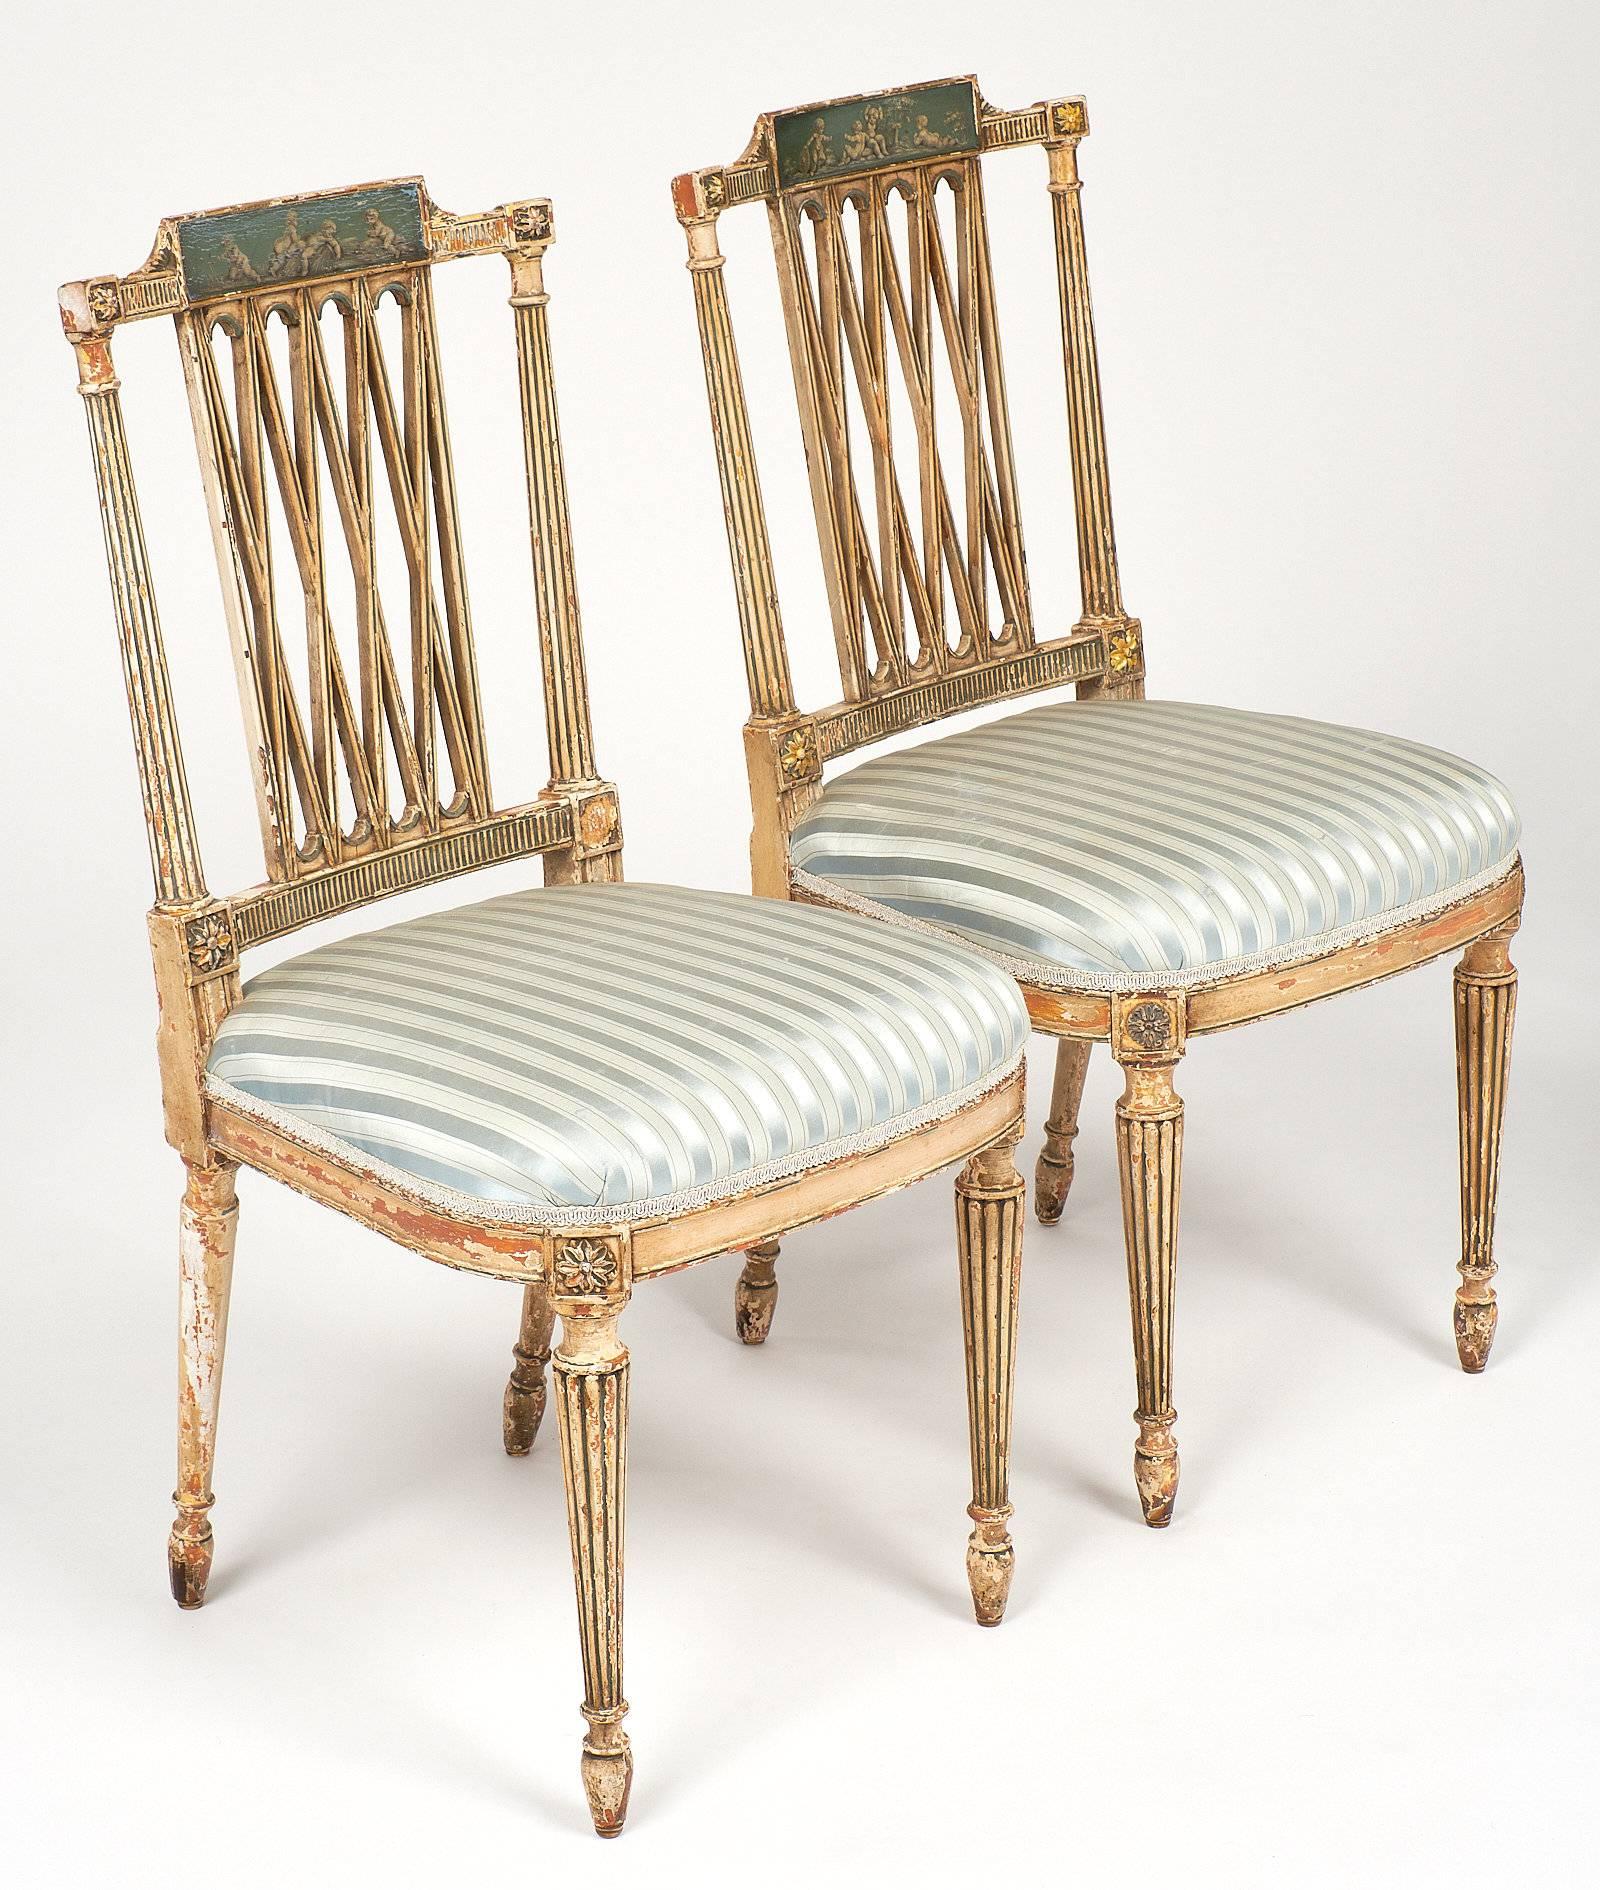 Pair of antique Italian painted side chairs. Crests are painted in blue and green with four grisailie painted putti on each chair in classical motifs above four “x” forms defining the back between reeded stiles. The chairs are upholstered in a light